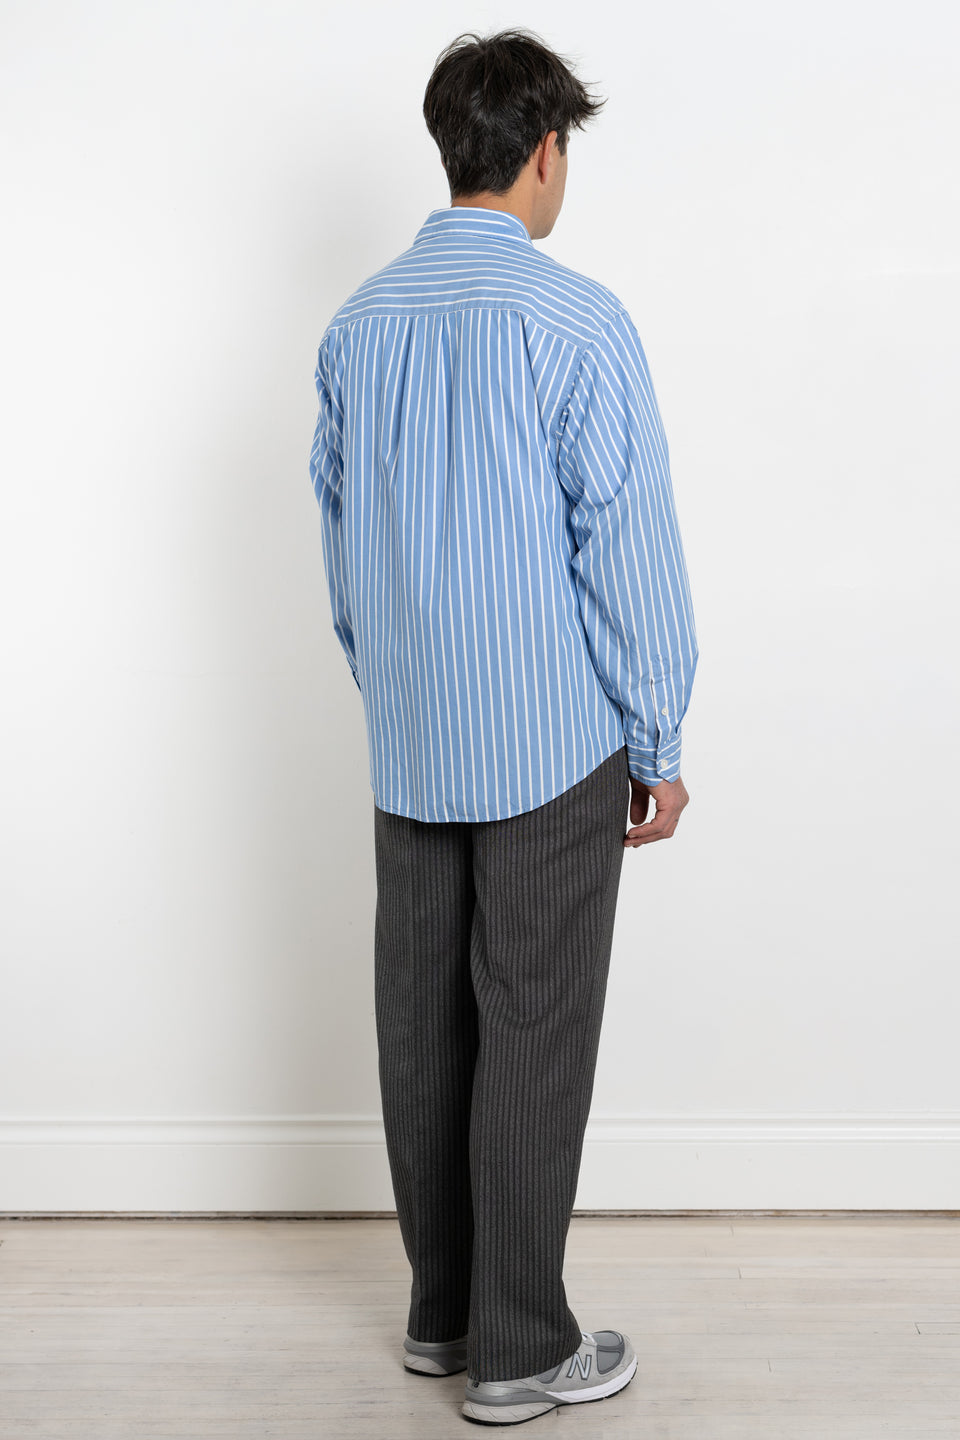 mfpen AW23 or FW23 Men's Collection Destroyed Executive Shirt Blue Stripe Organic Cotton Calculus Victoria BC Canada